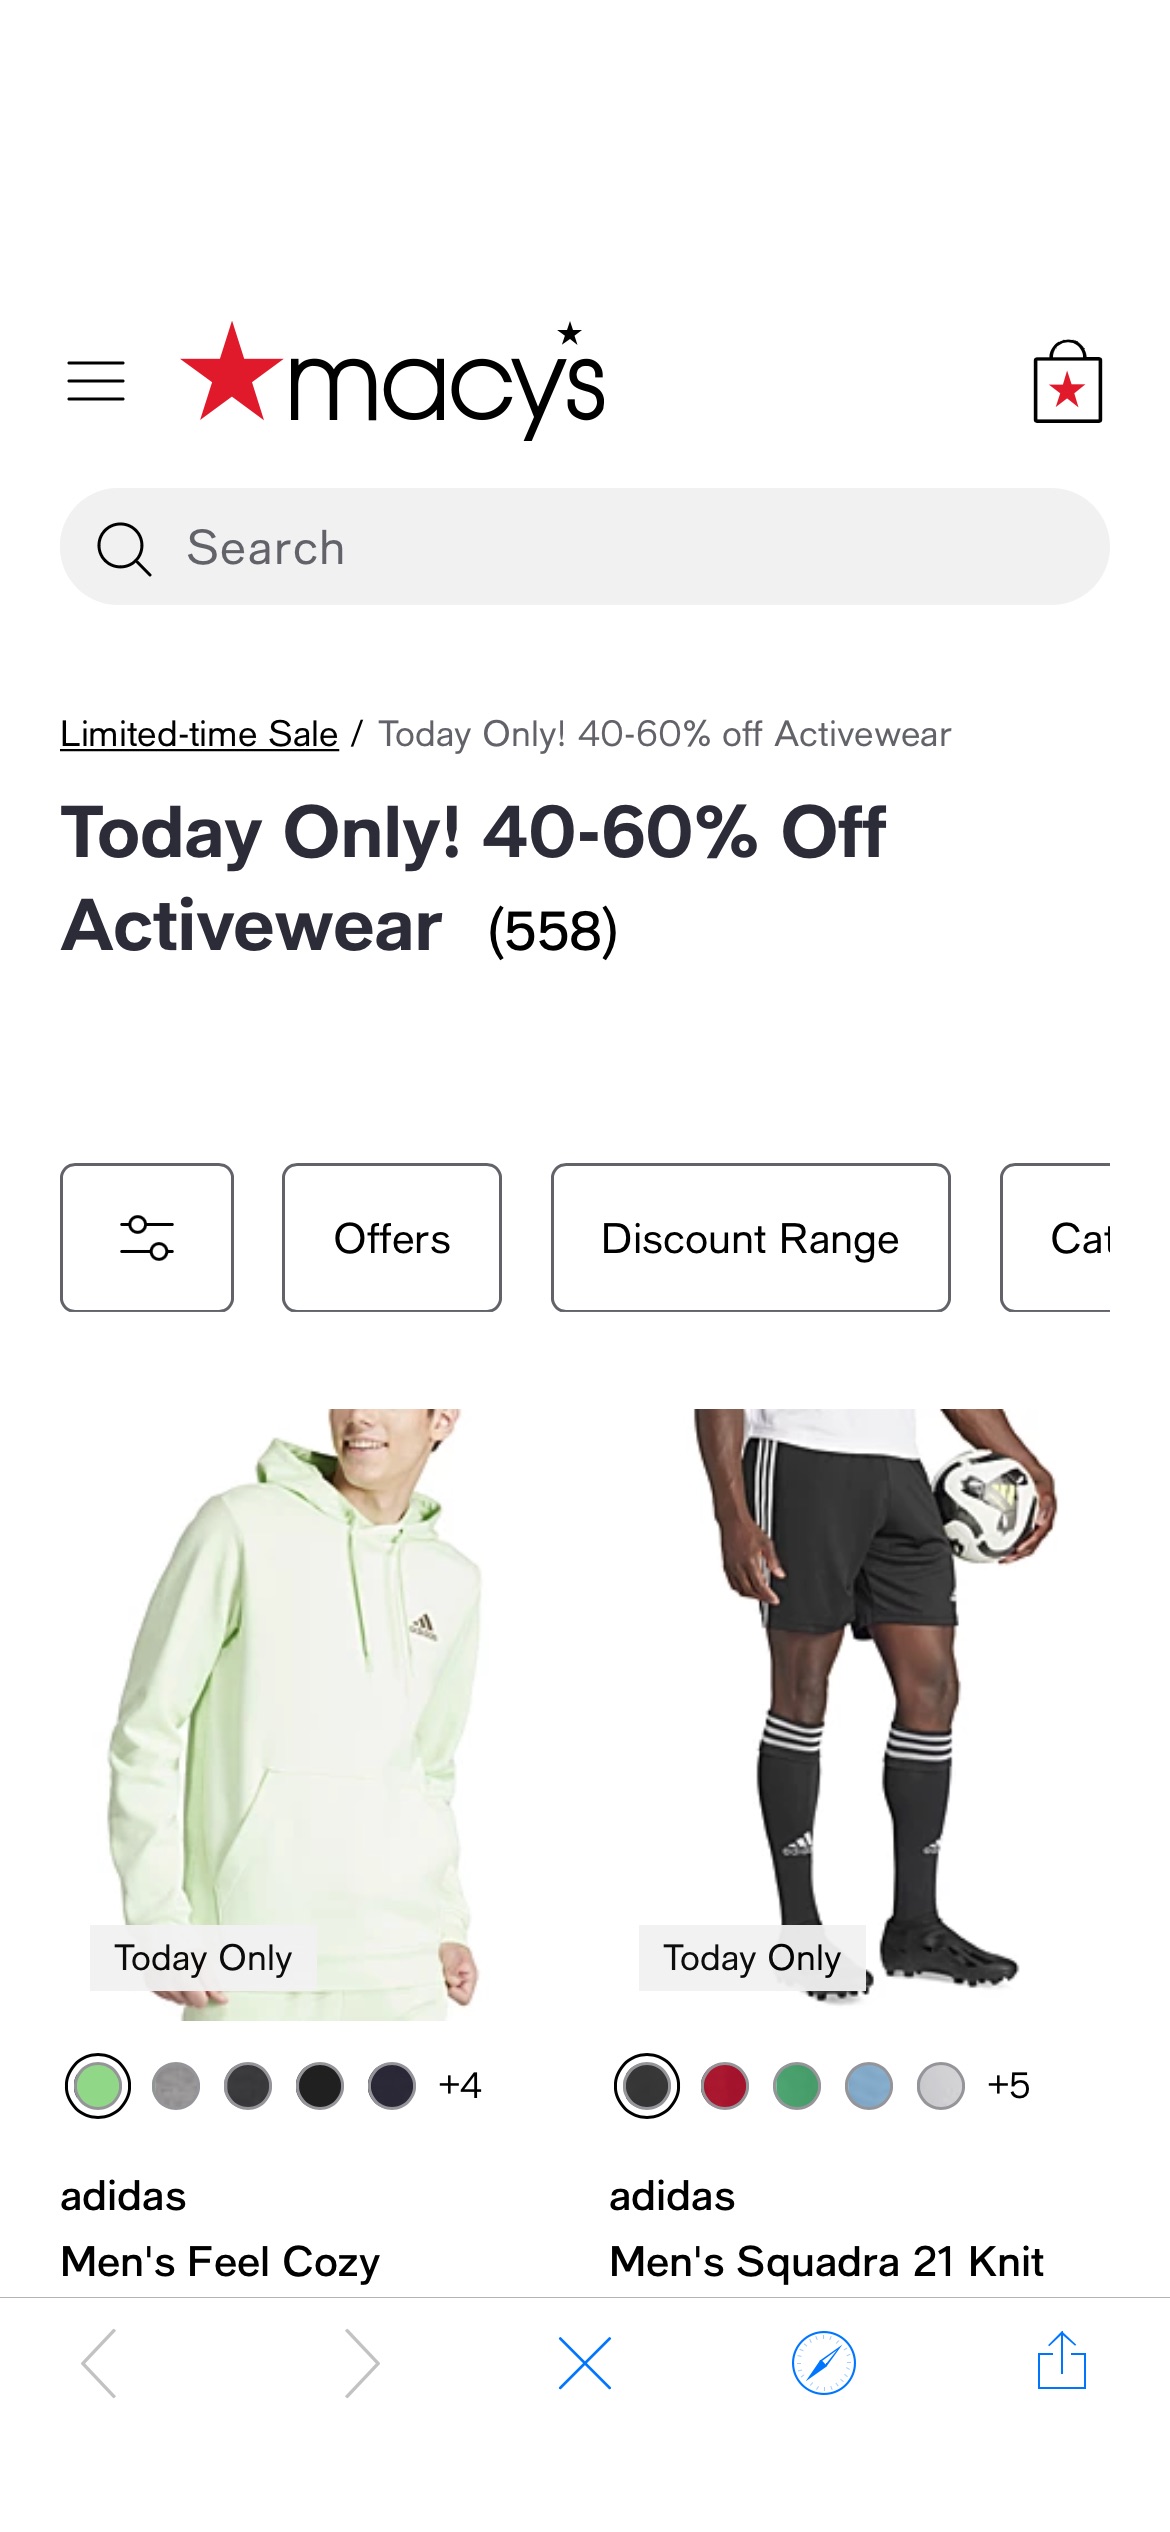 Today Only! 40-60% Off Activewear